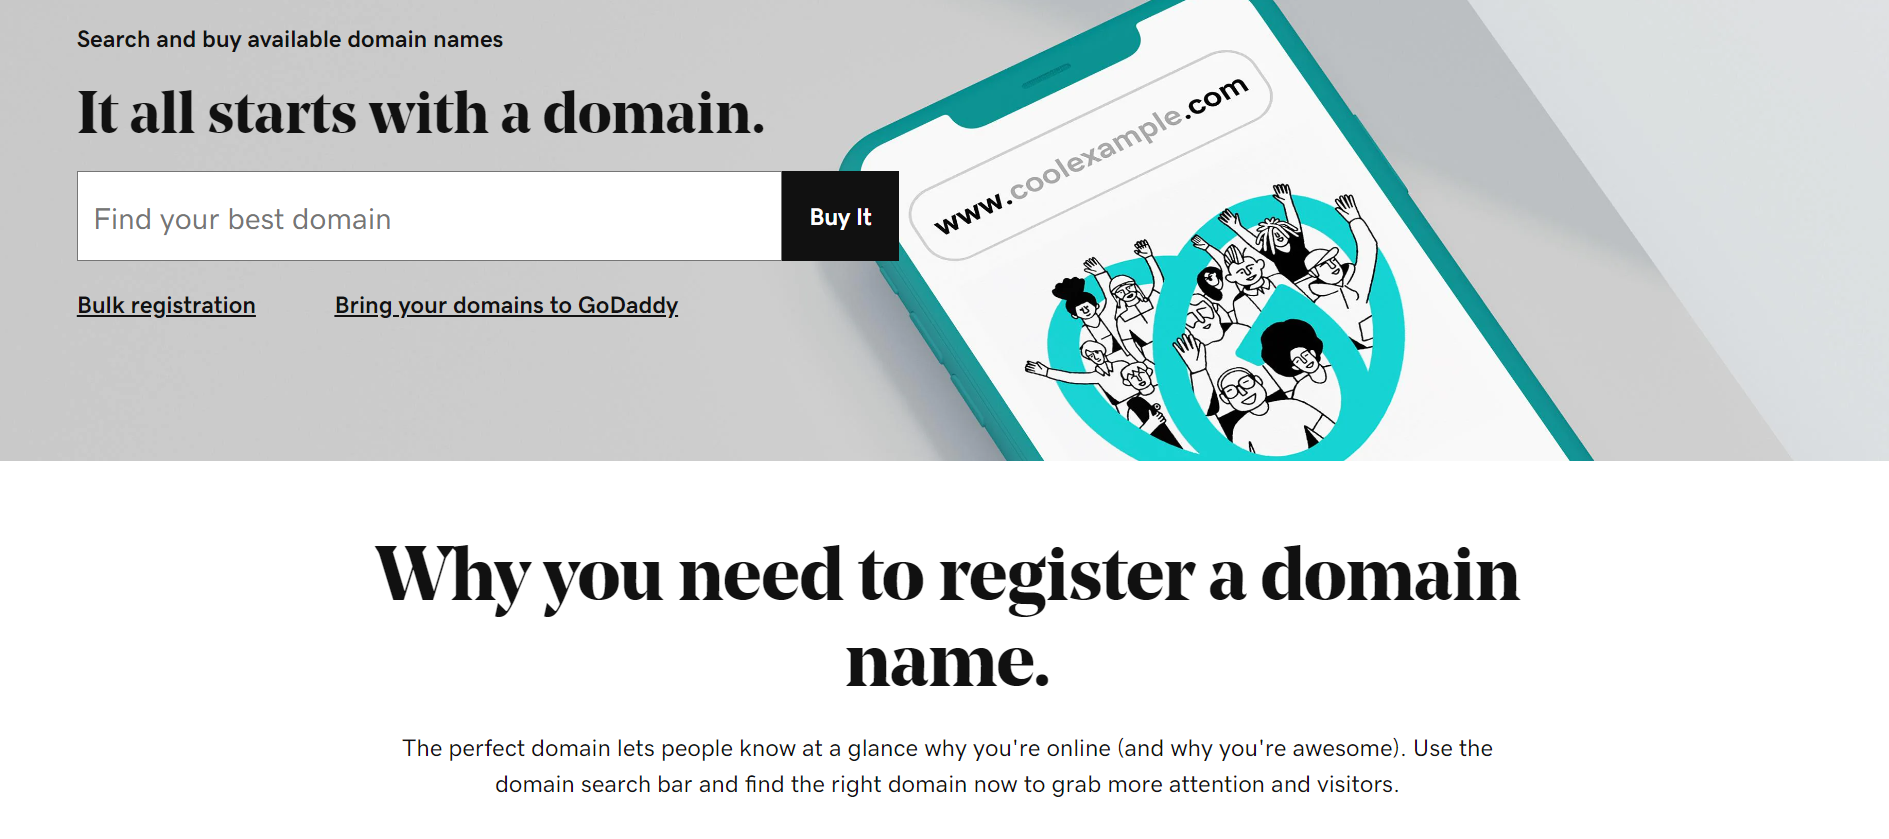 GoDaddy domain registration with domain search bar